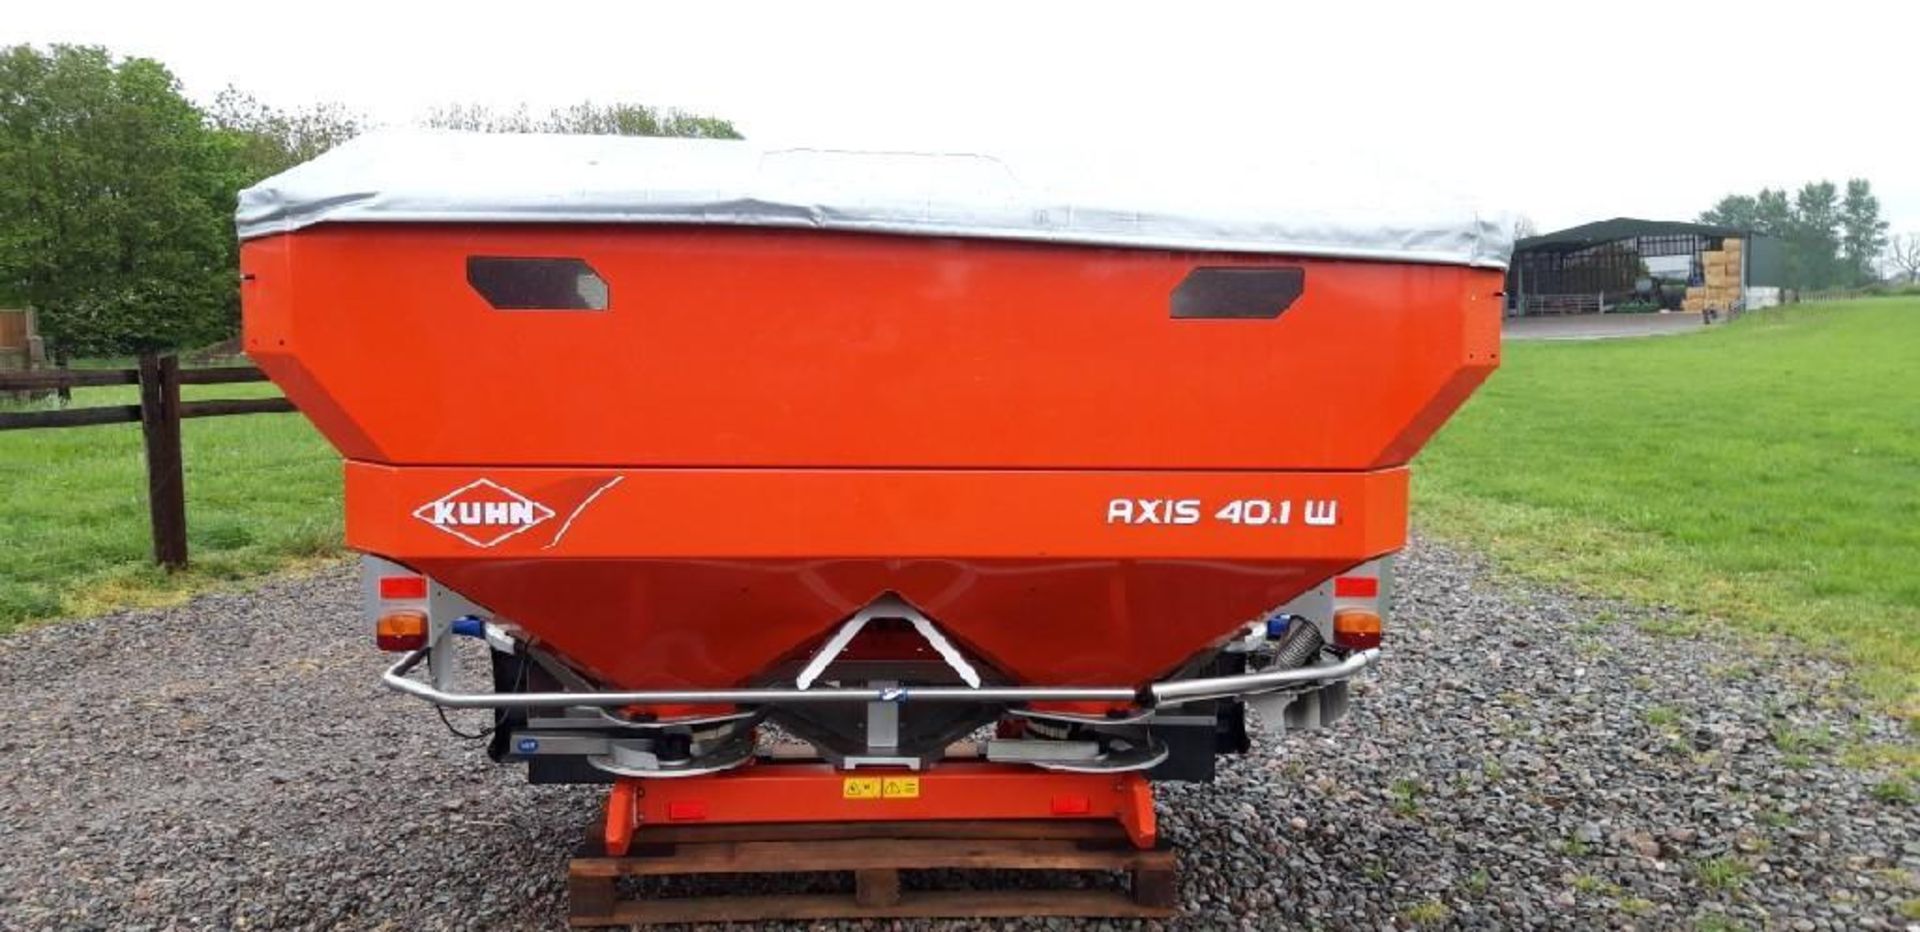 Kuhn Axis 40.1 W Weigh Cell Fertiliser Spreader - Image 5 of 14